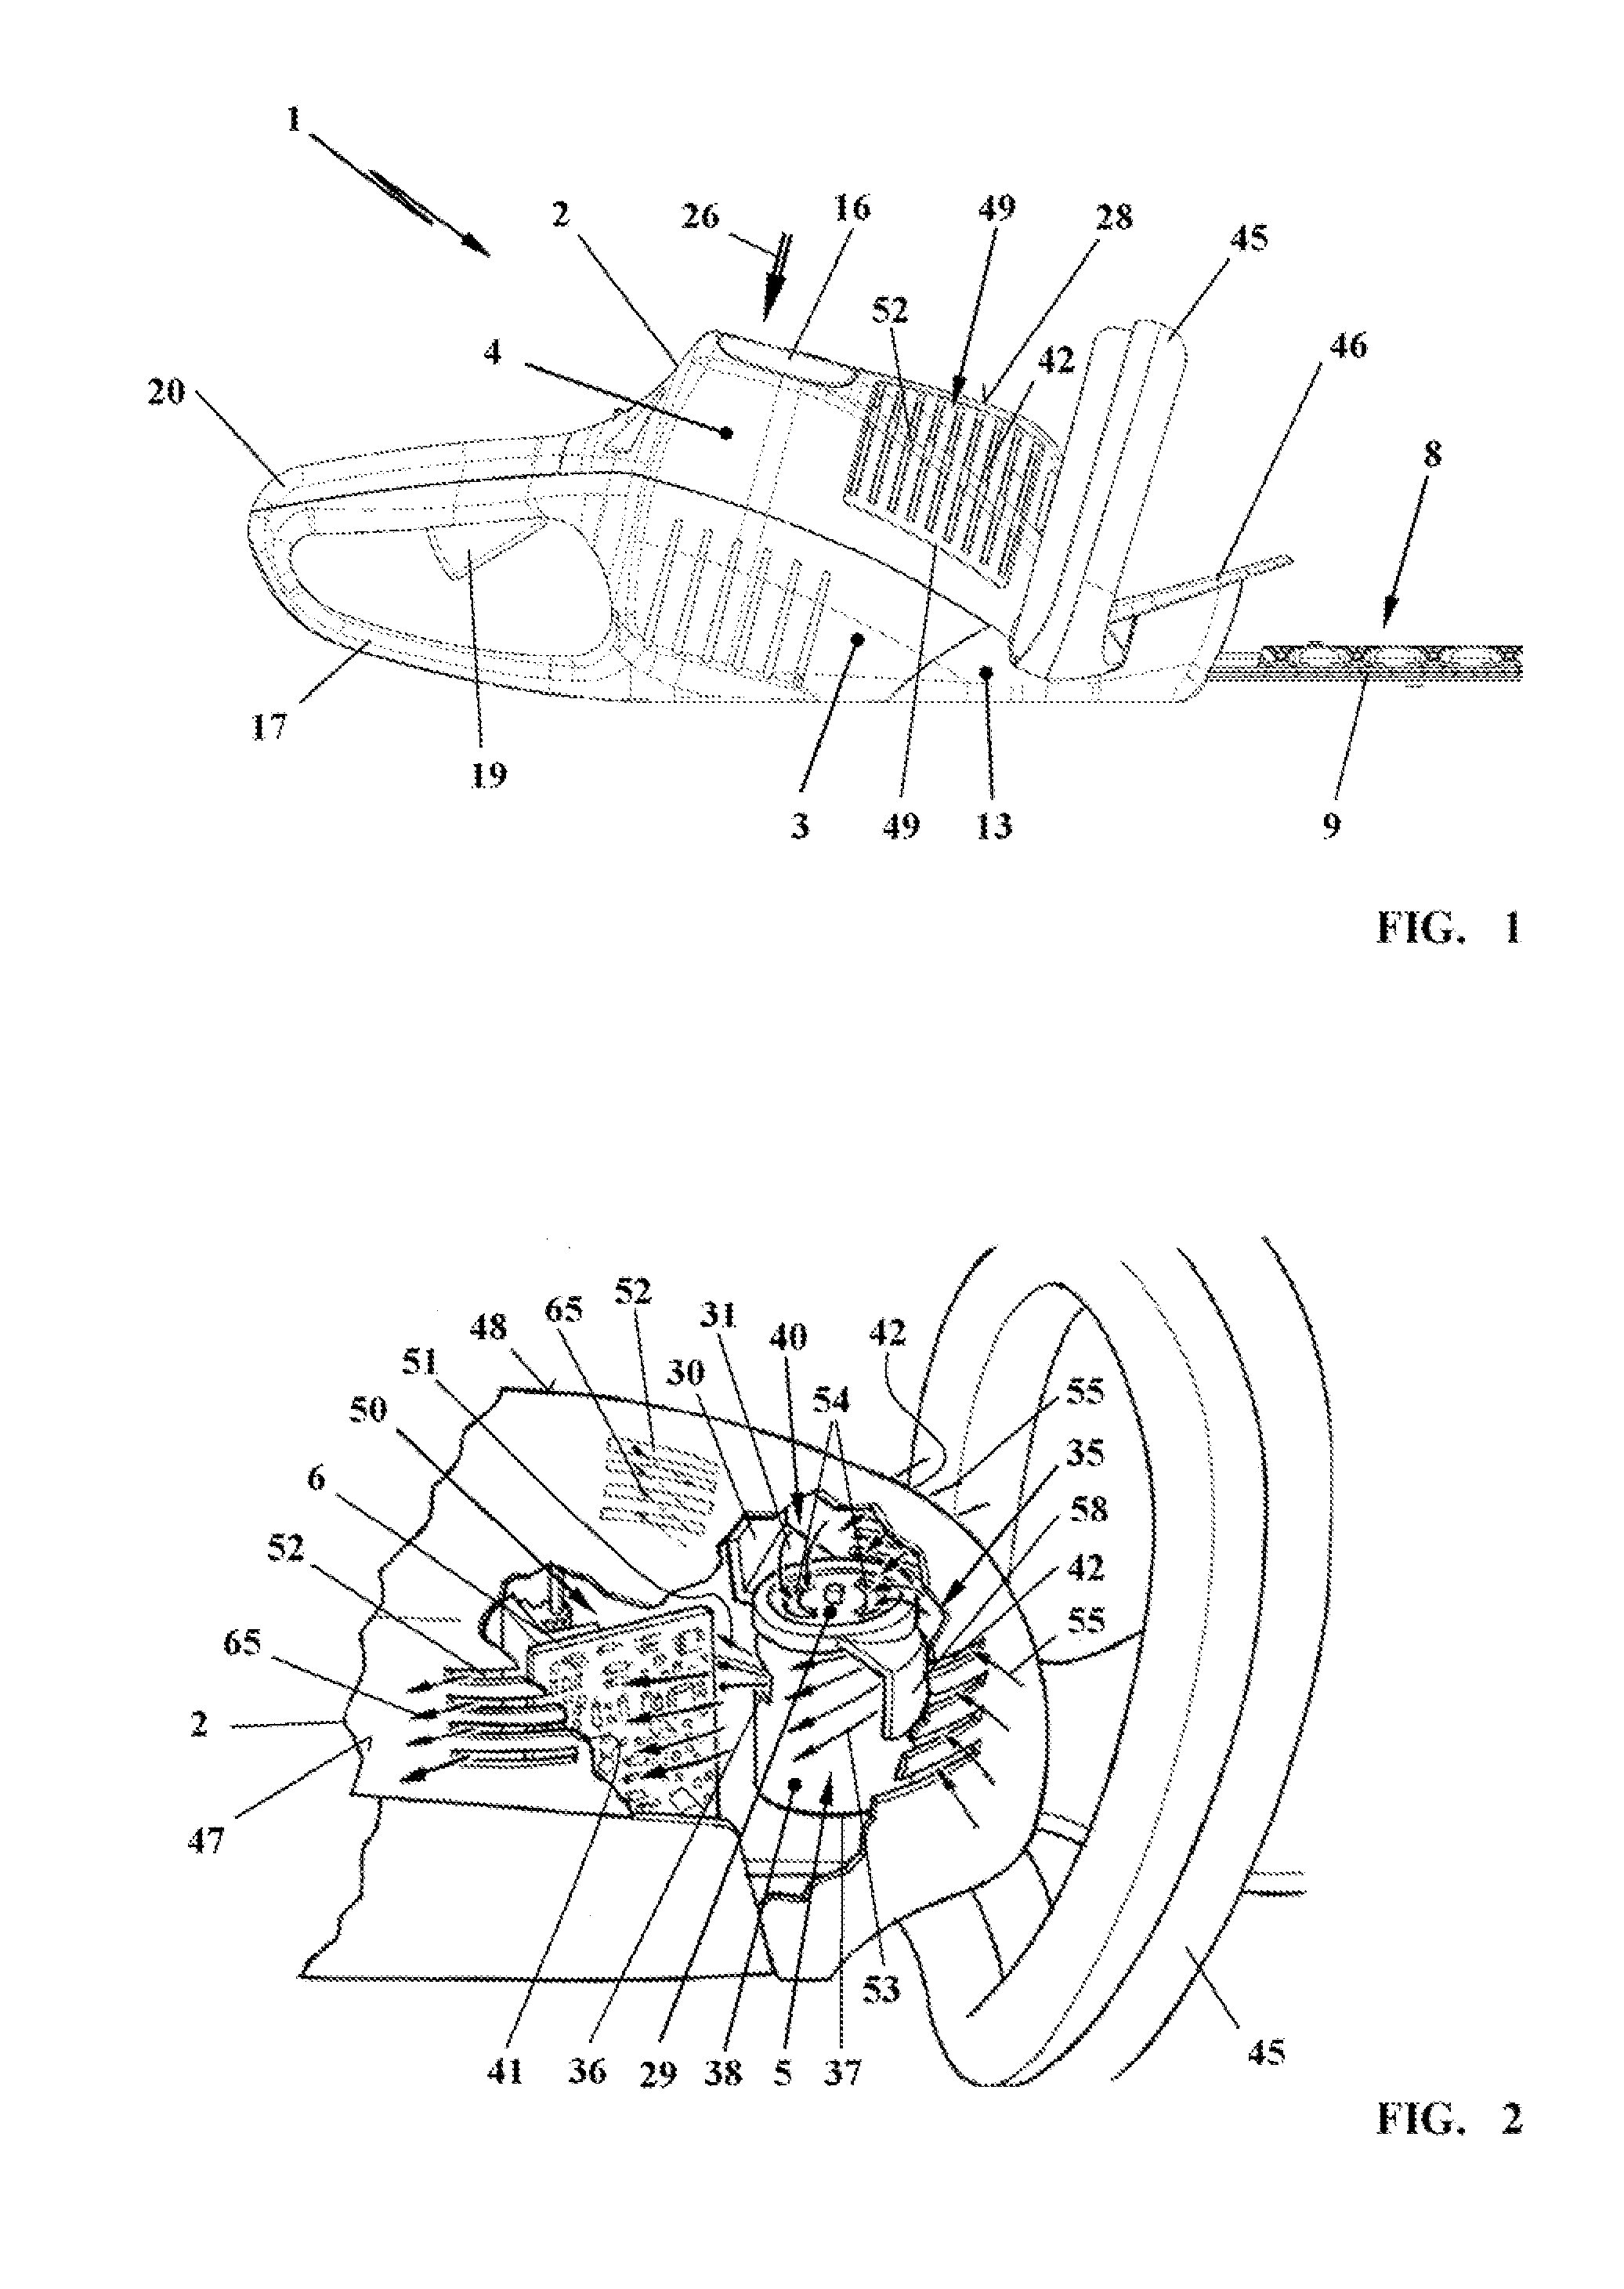 Battery-Operated Hand-Held Electric Device